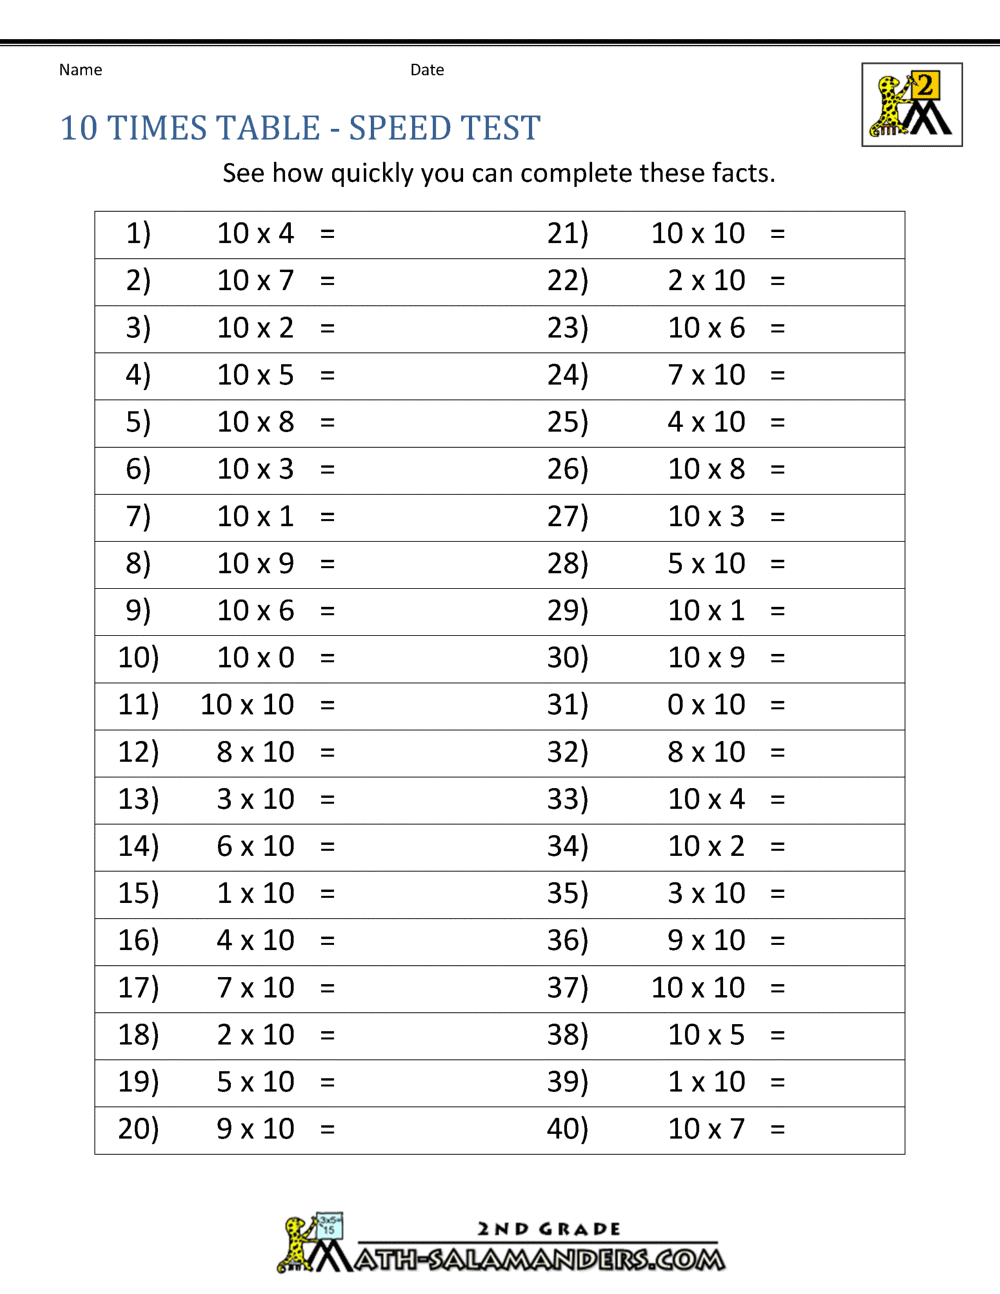 10-times-table